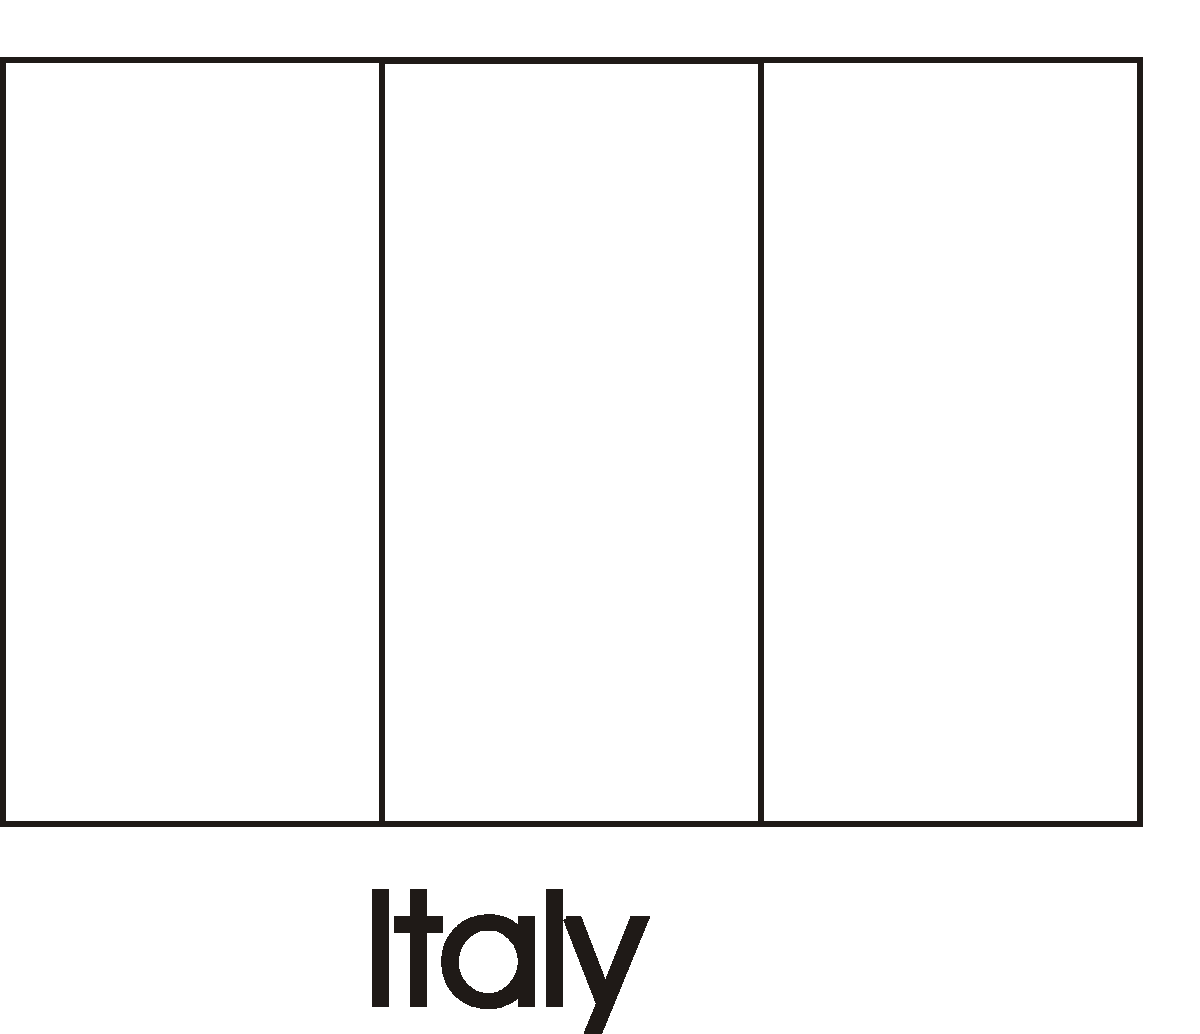 italy flag coloring page italian flag world thinking day coloring pages pinterest italy flag coloring page 